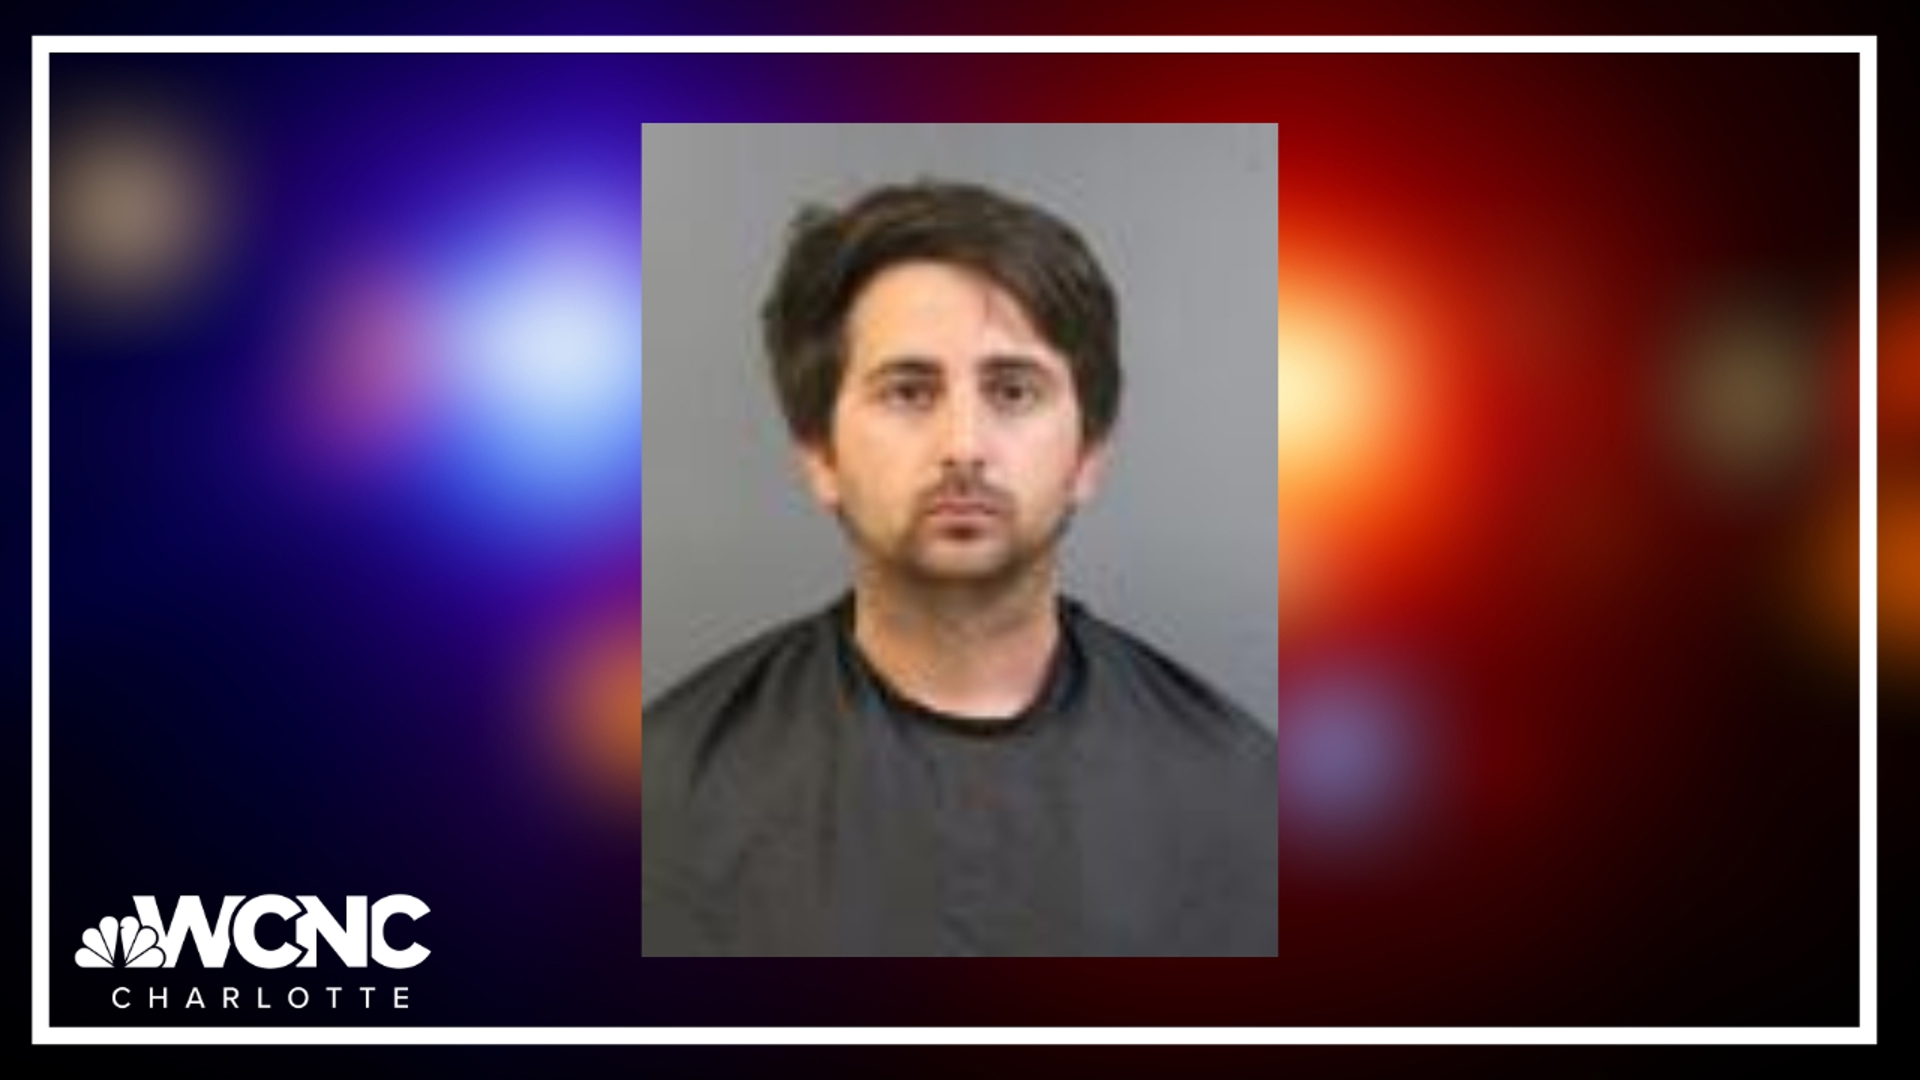 He was arrested across the state line in Gaffney, South Carolina.